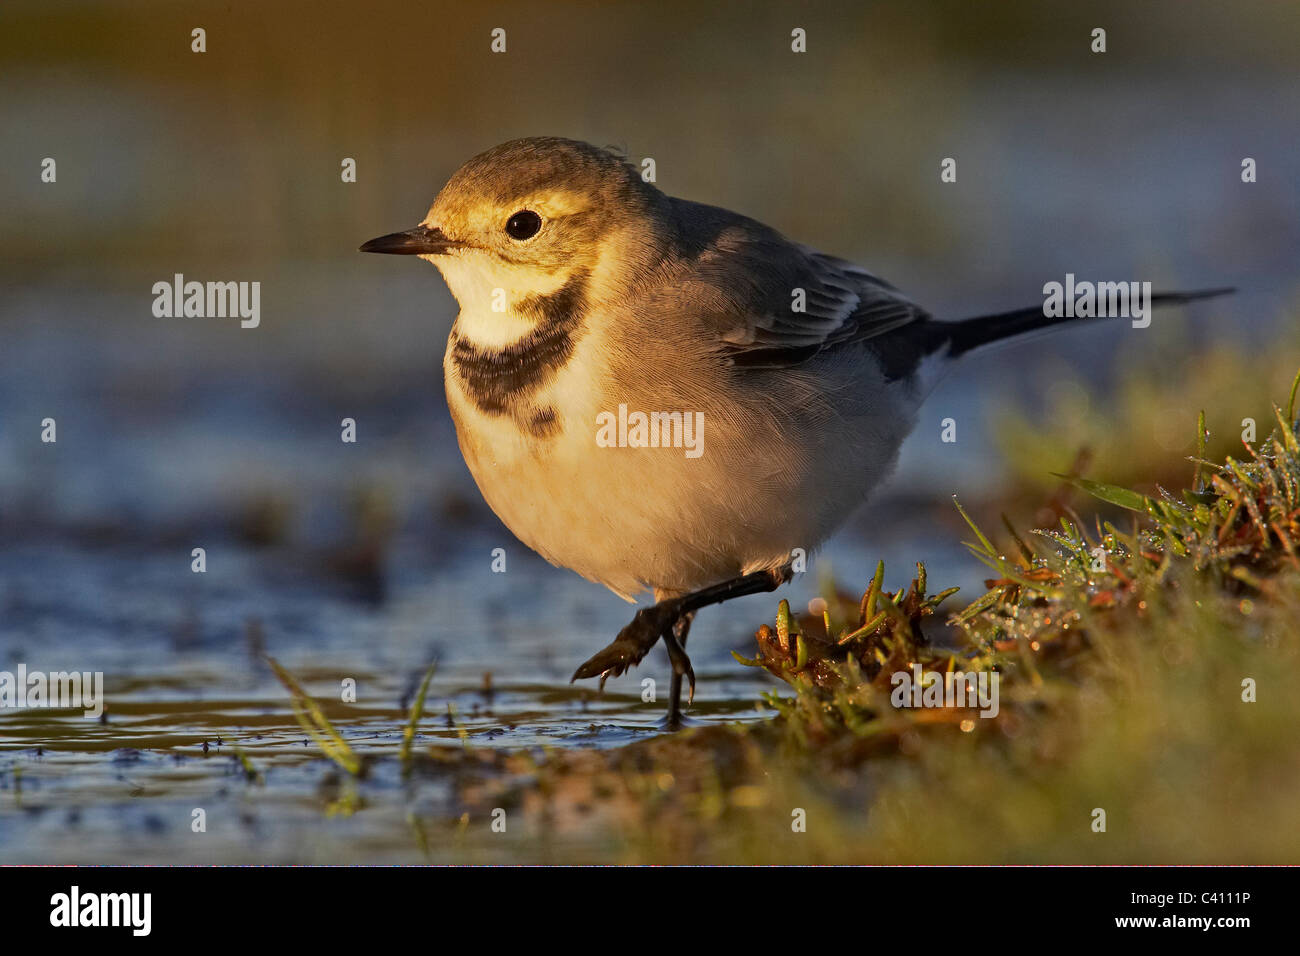 Pied Wagtail, Pied White Wagtail (Motacilla alba), juvenile walking in shallow water. Stock Photo